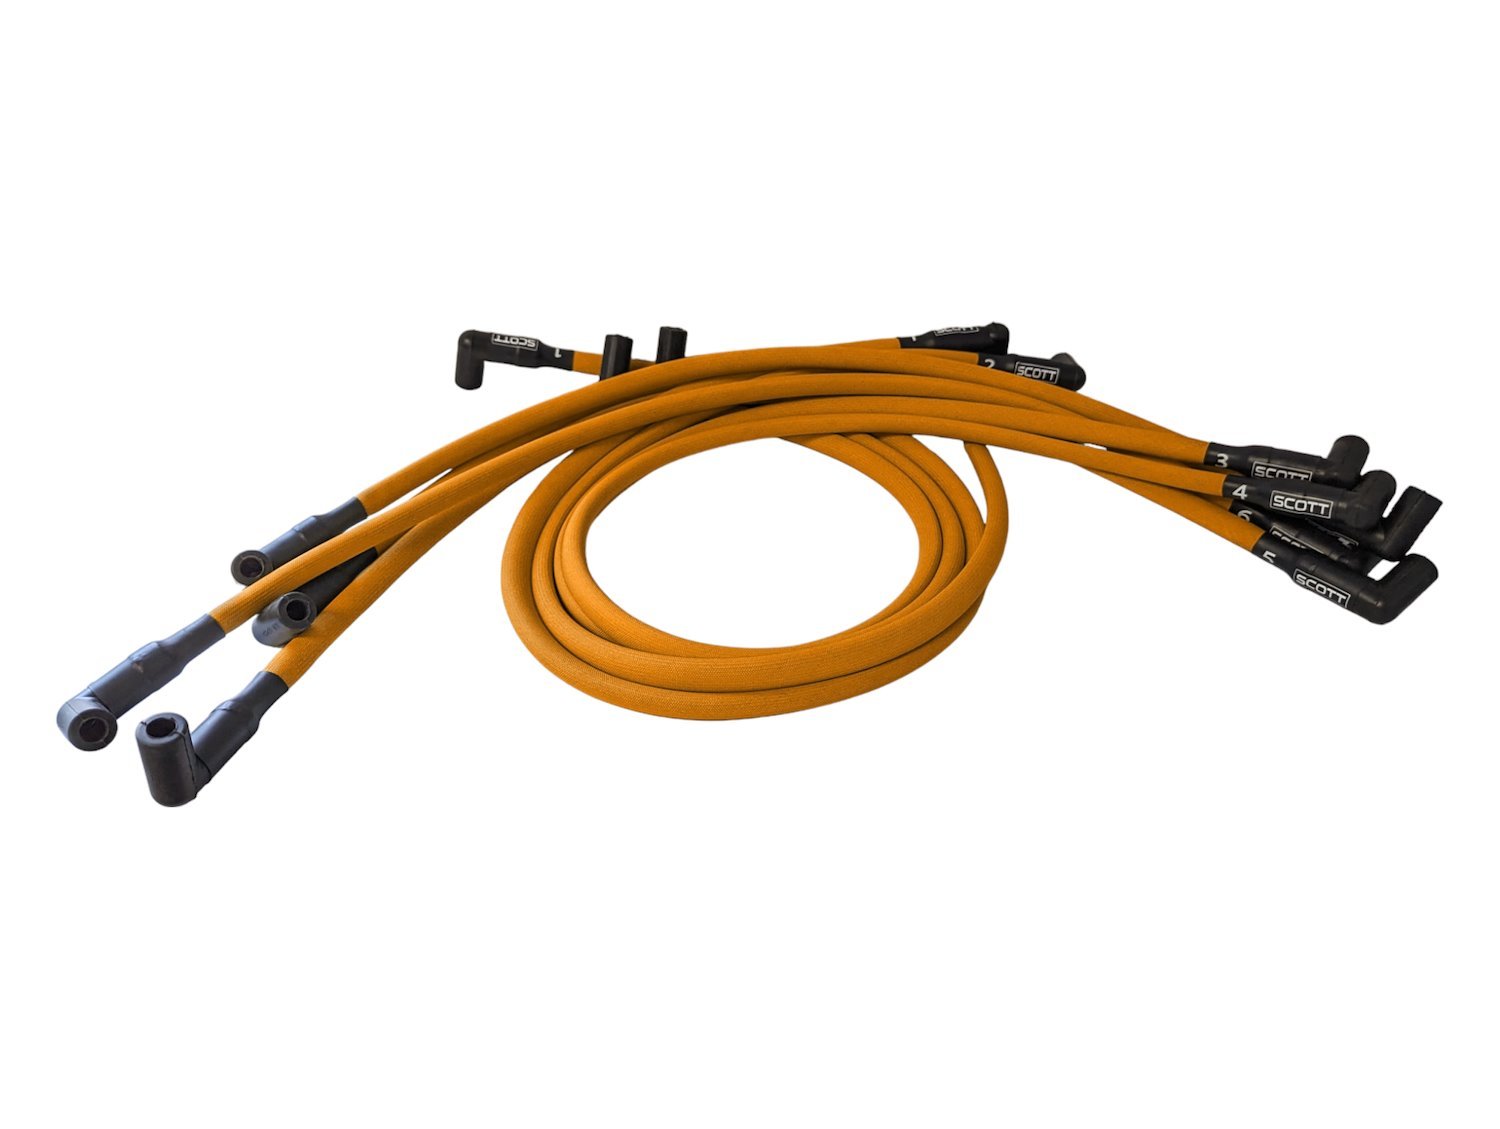 SPW-PS-407-6 High-Performance Fiberglass-Oversleeved Spark Plug Wire Set for Small Block Chevy, Under Header [Orange]